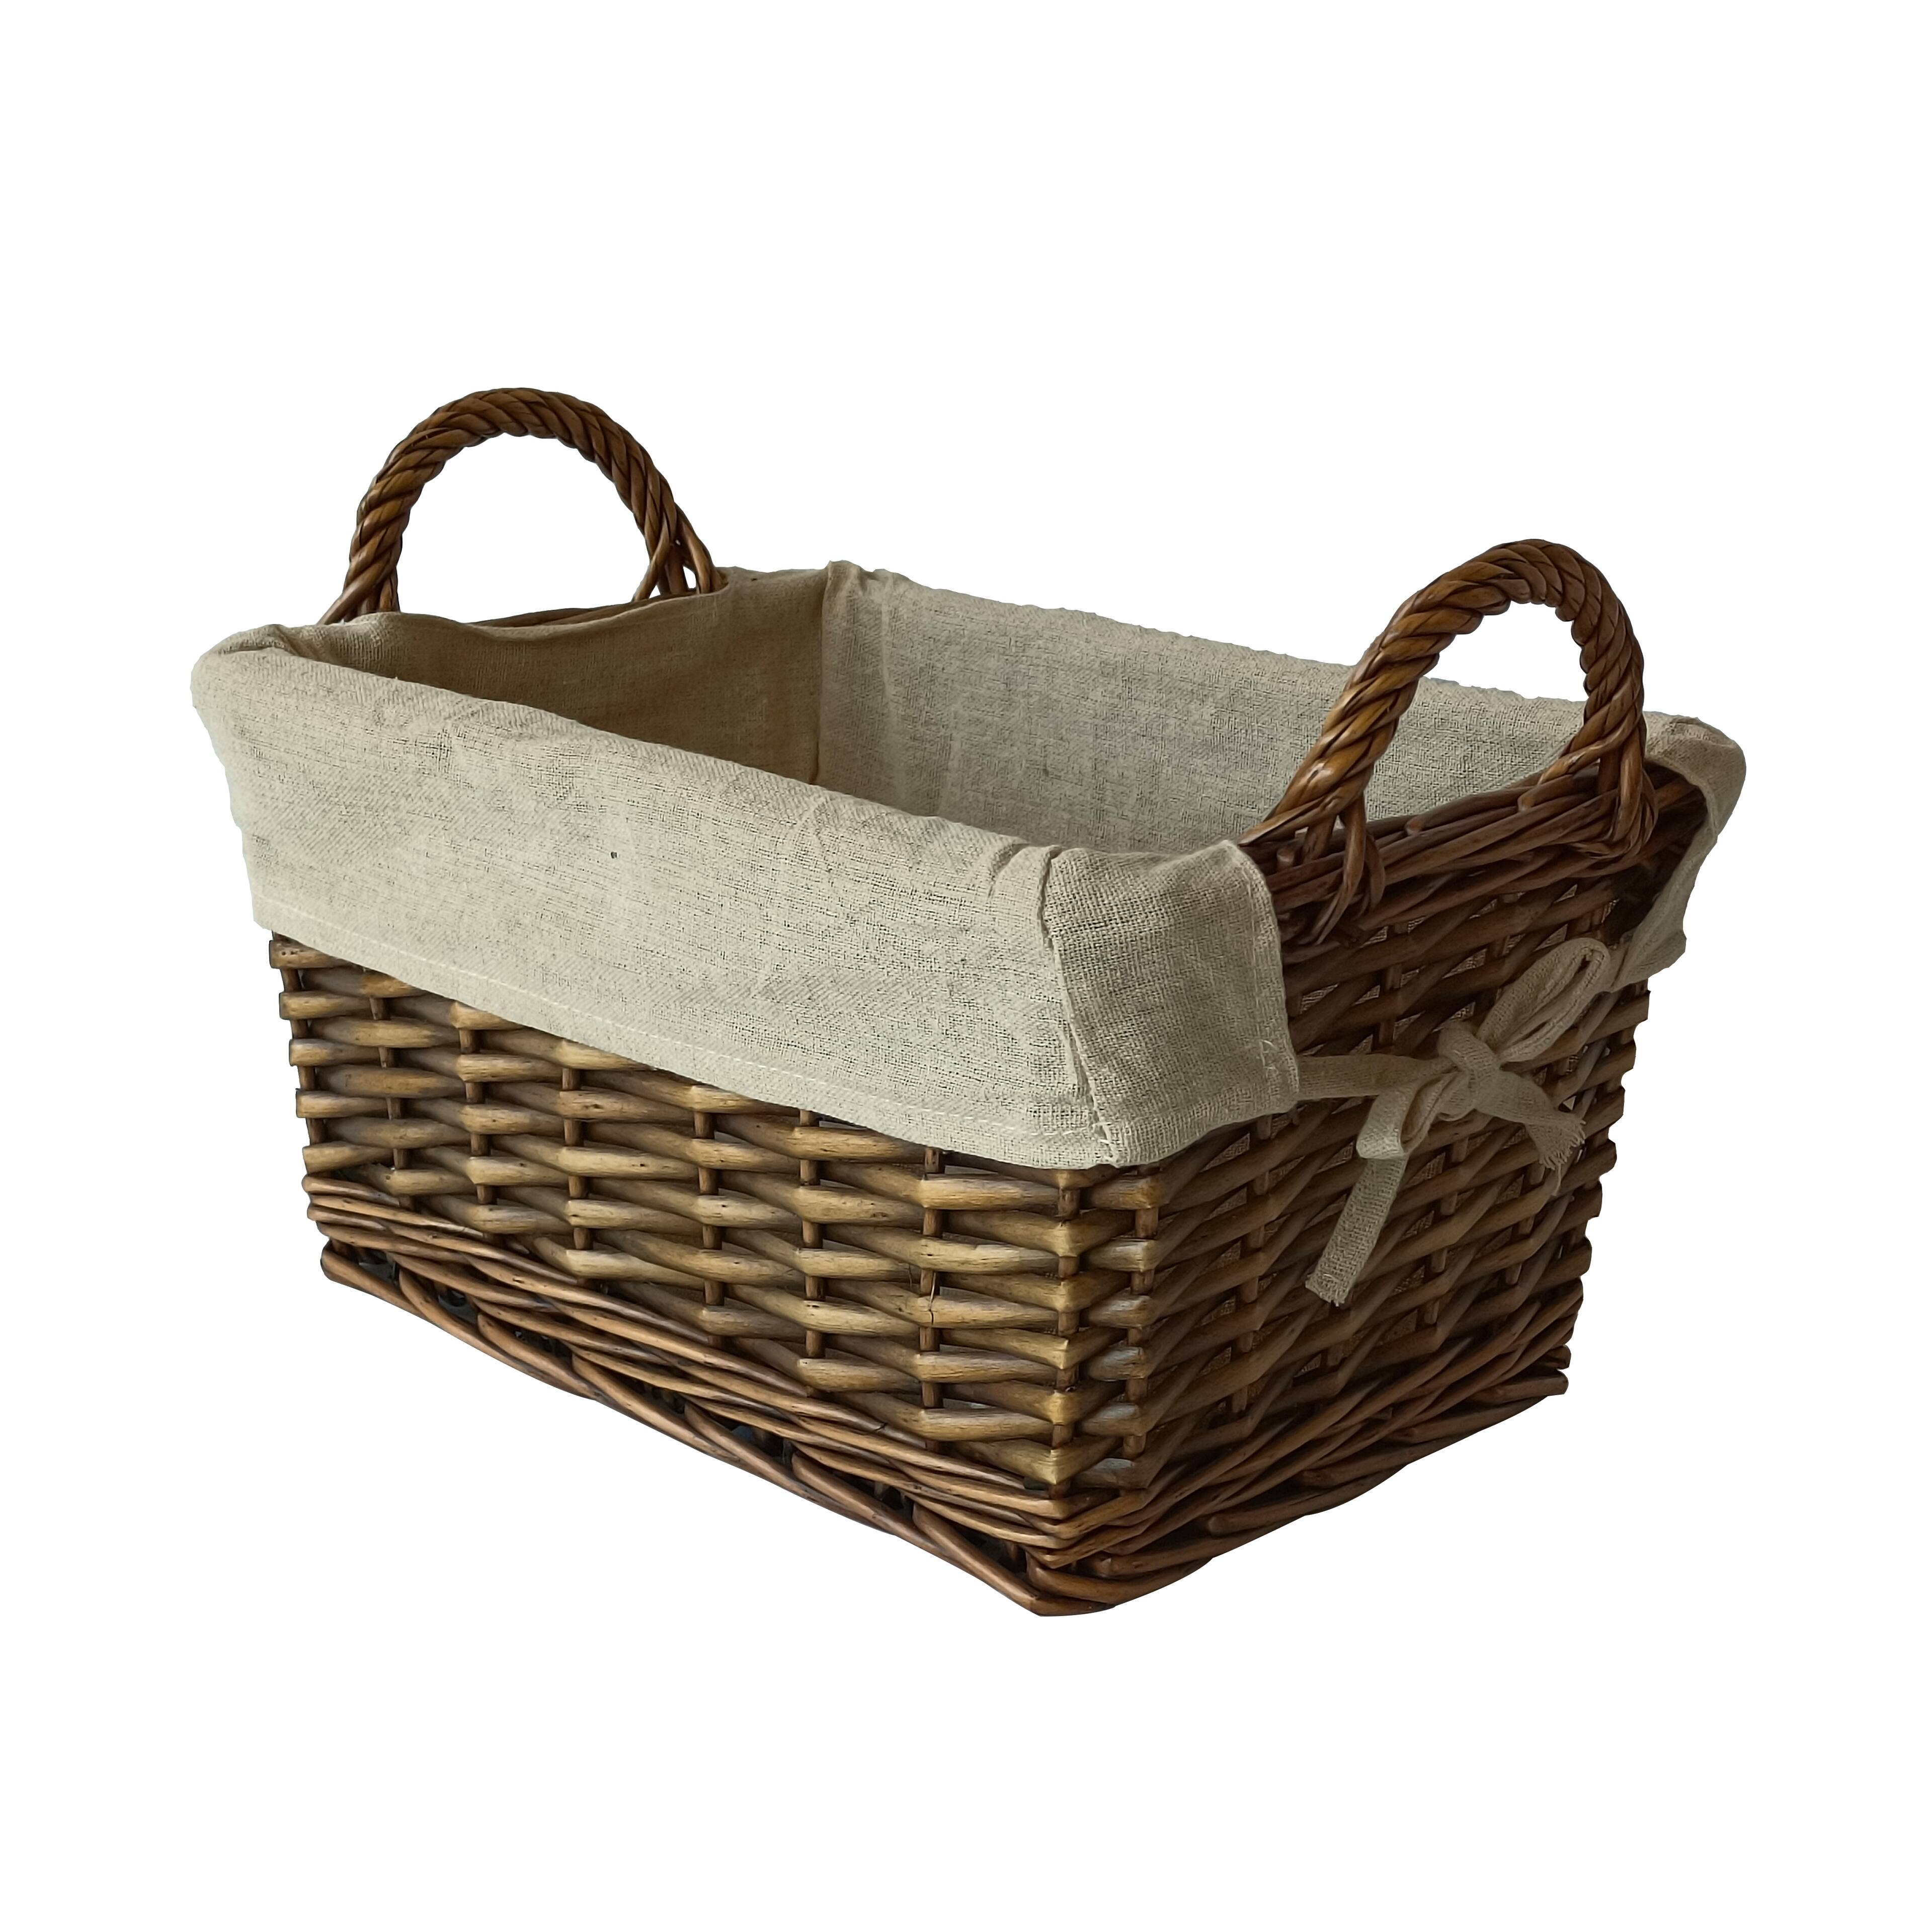 WICKER WILLOW BASKET LOG CARRIER HOLDER WITH HANDLES LINING STORAGE PICNIC 